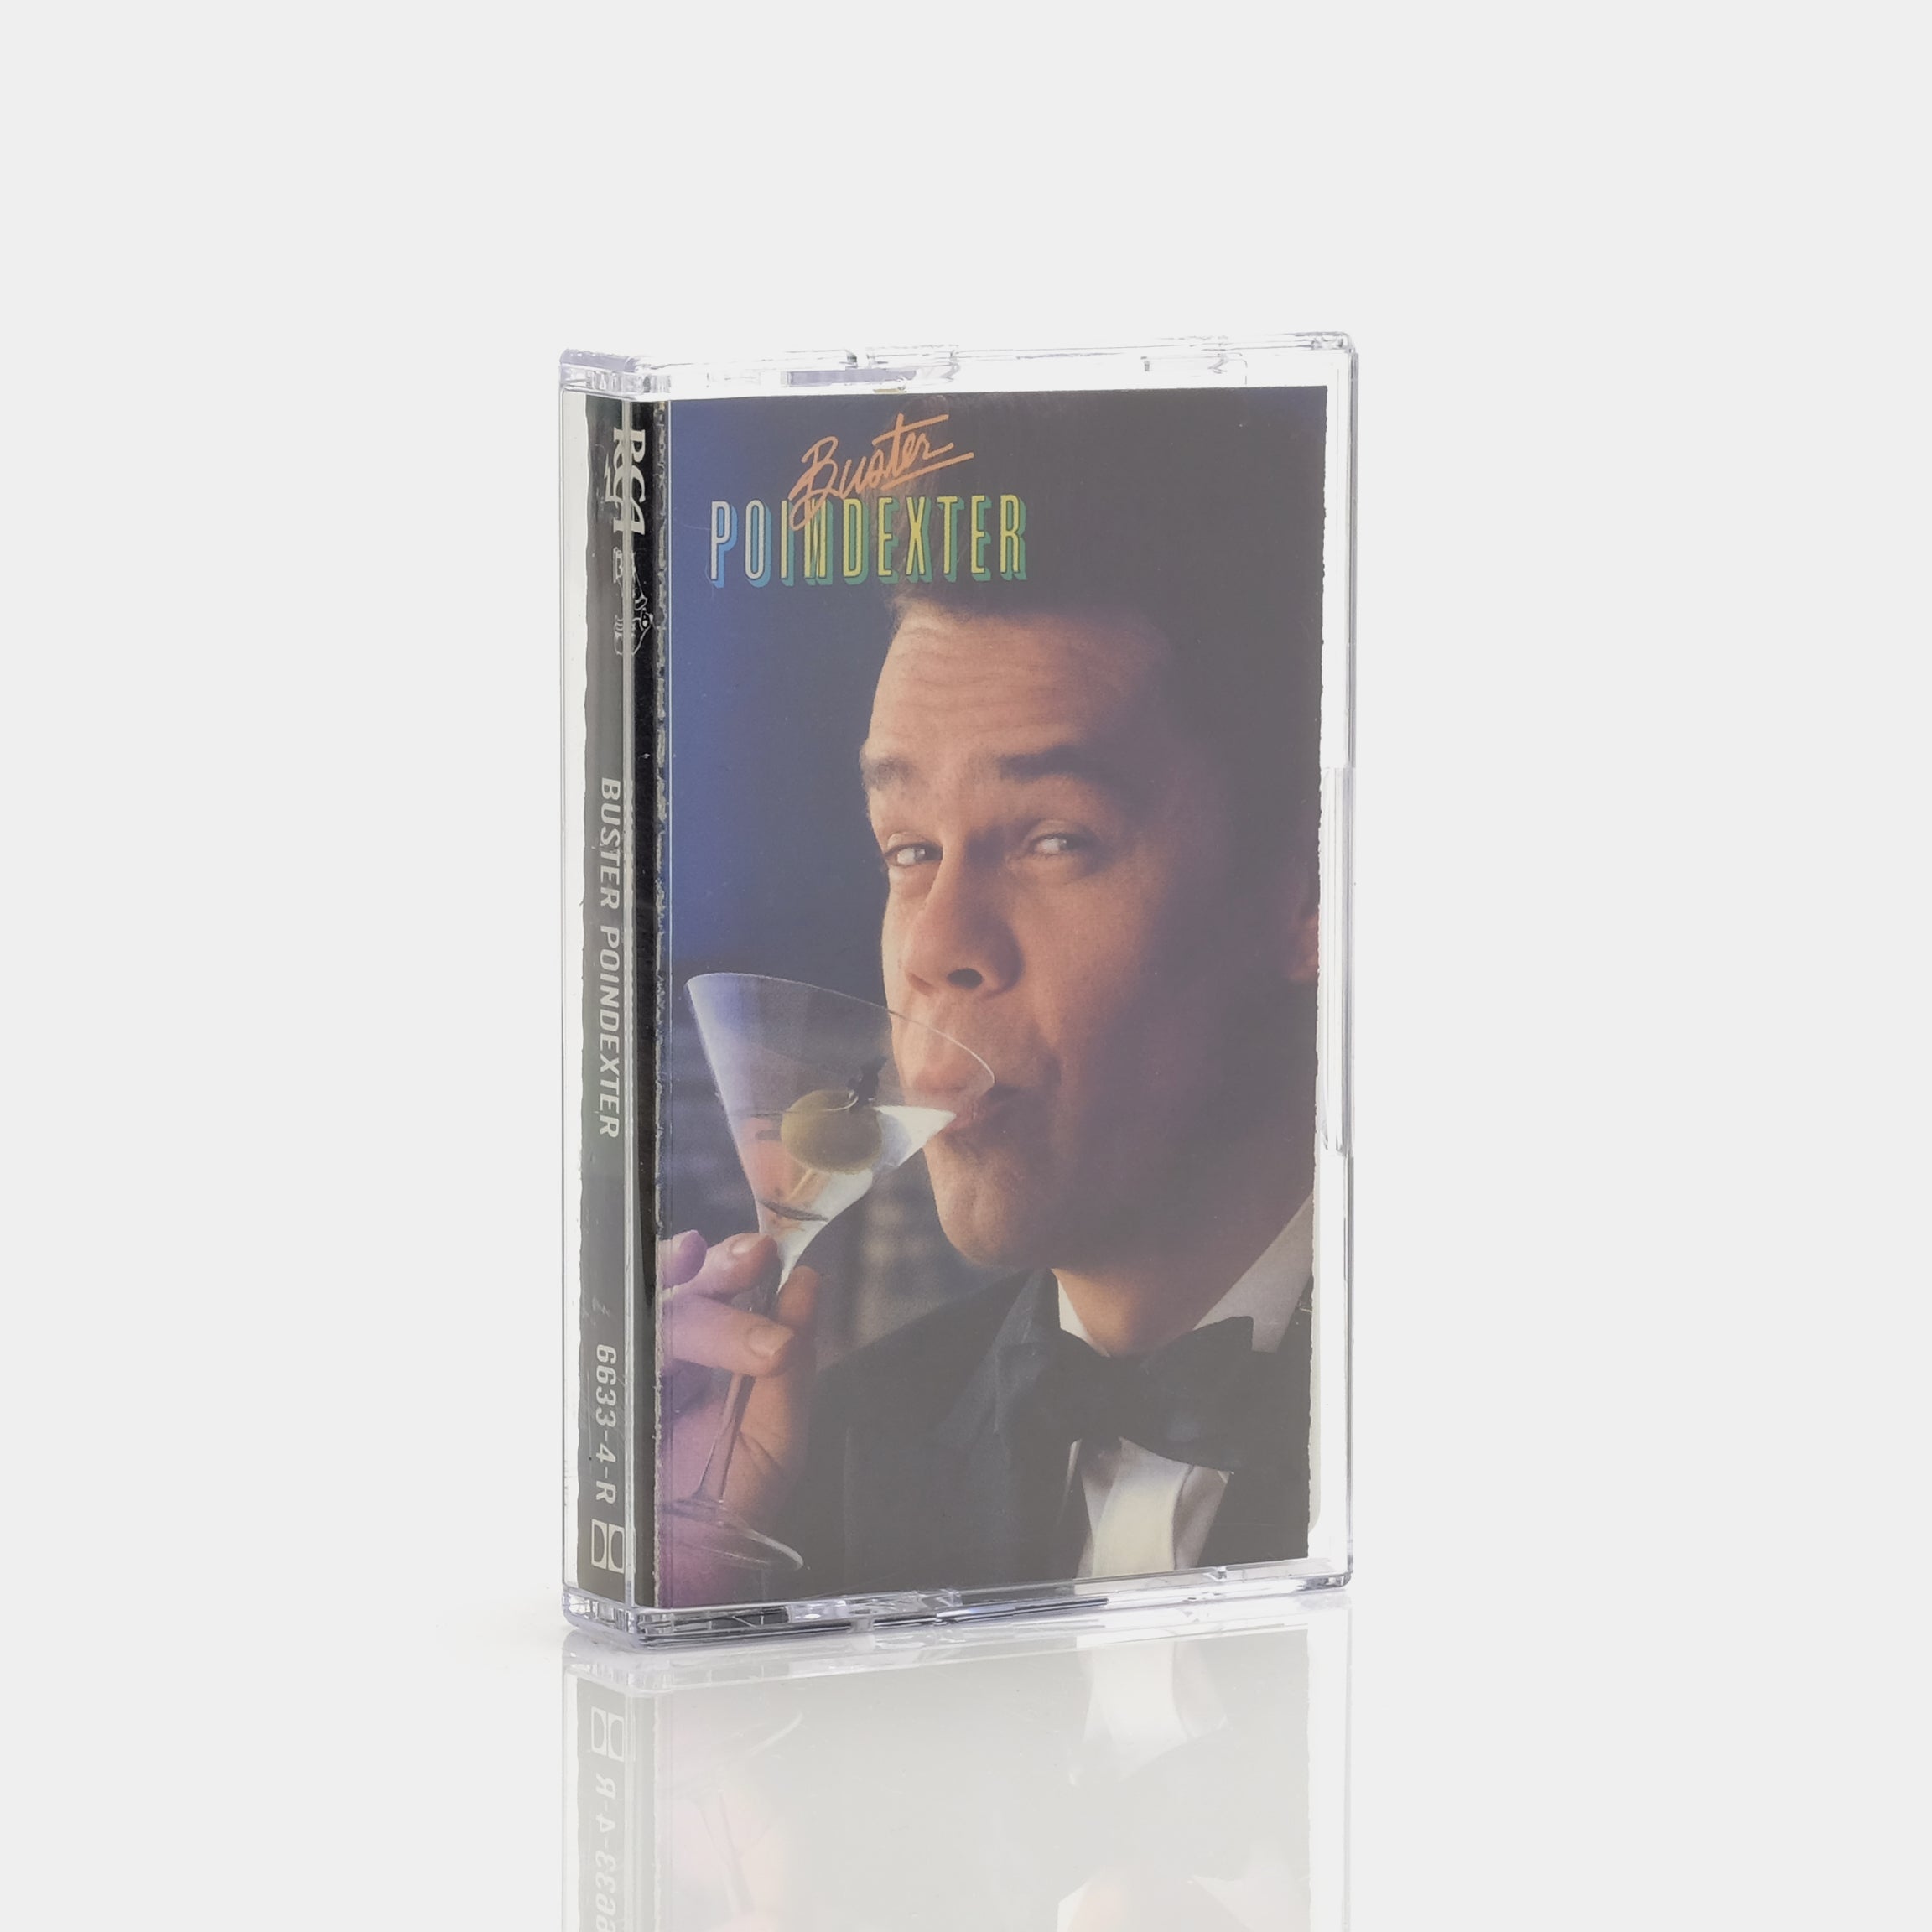 Buster Poindexter - Buster Poindexter Cassette Tape